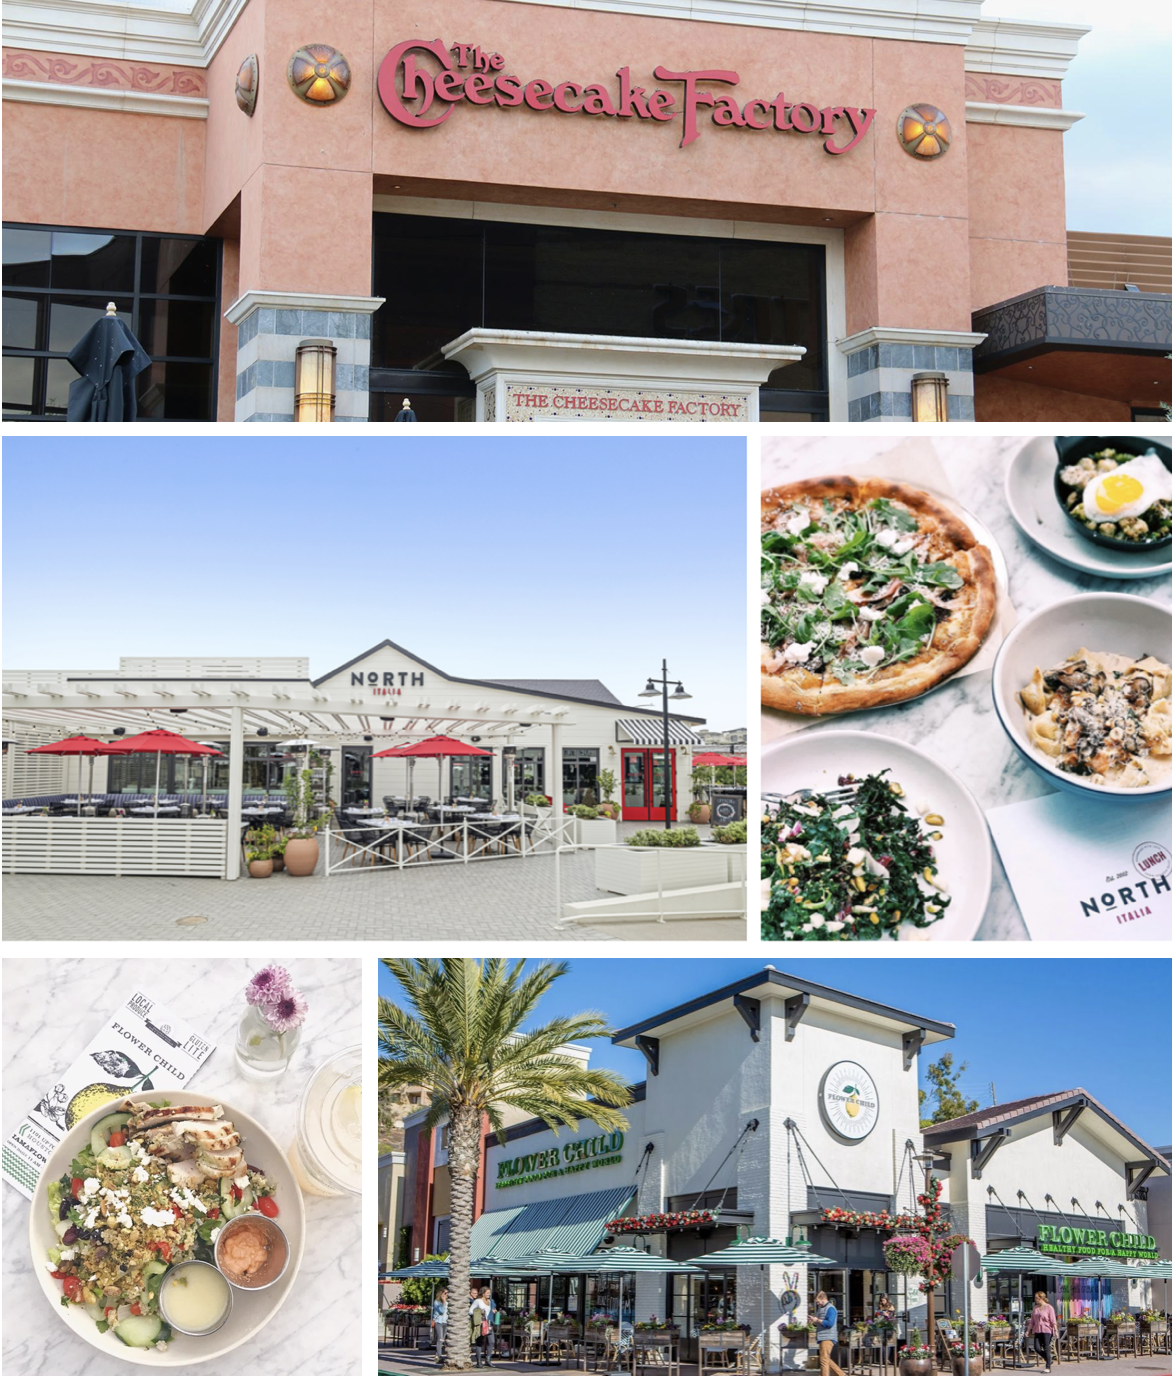 SanDiegoVille: The Cheesecake Factory To Take Over Ownership Of